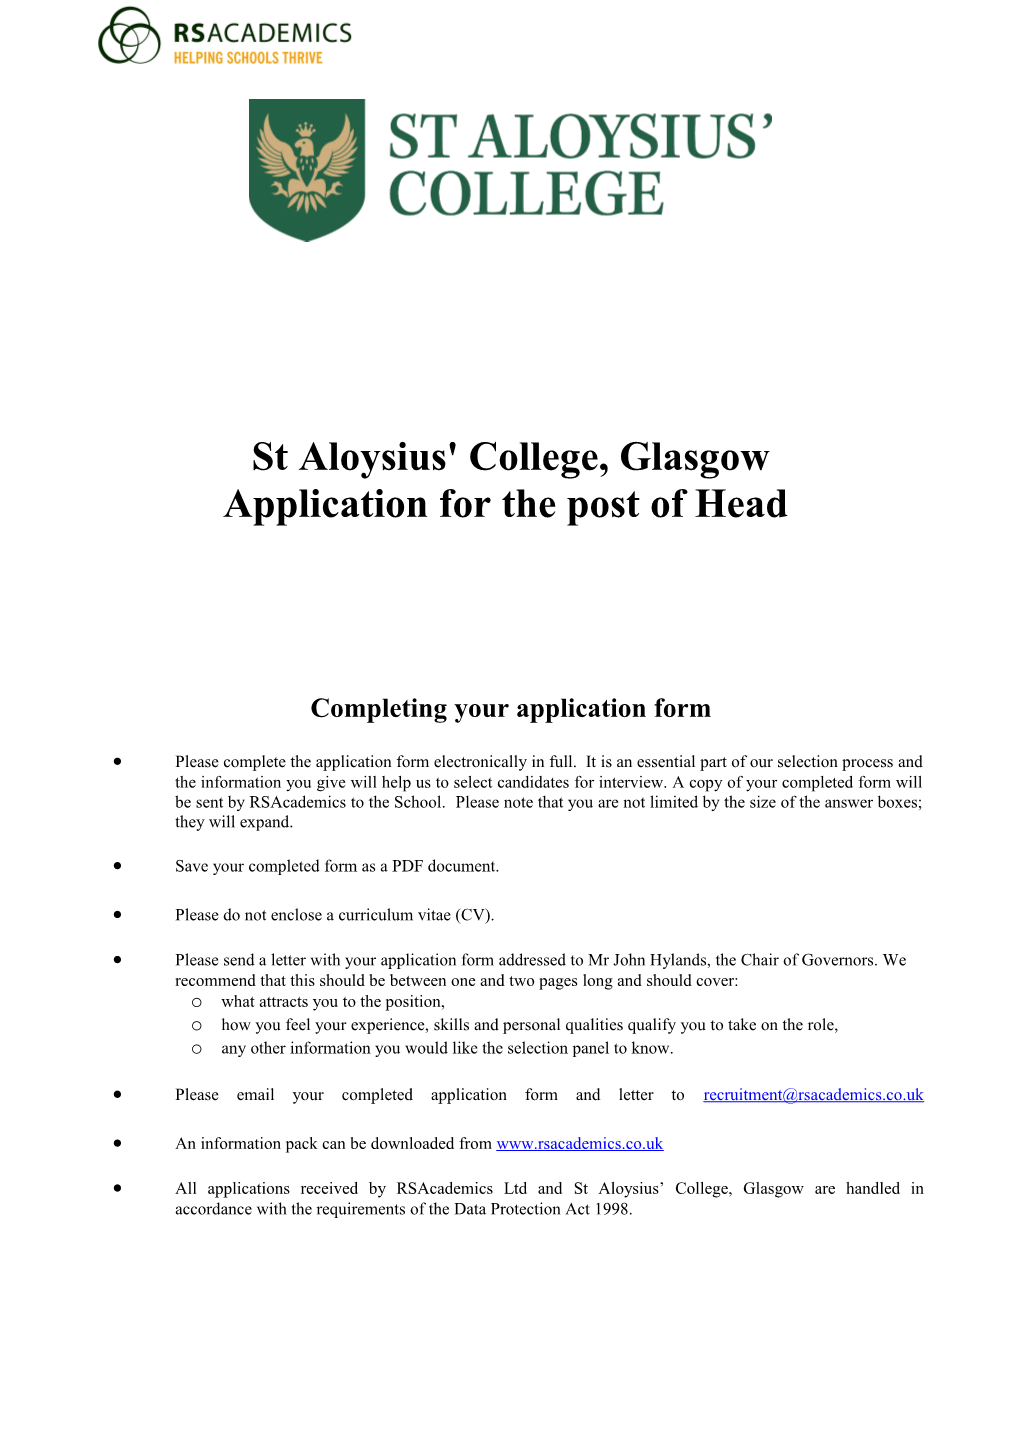 Application for the Post of Head